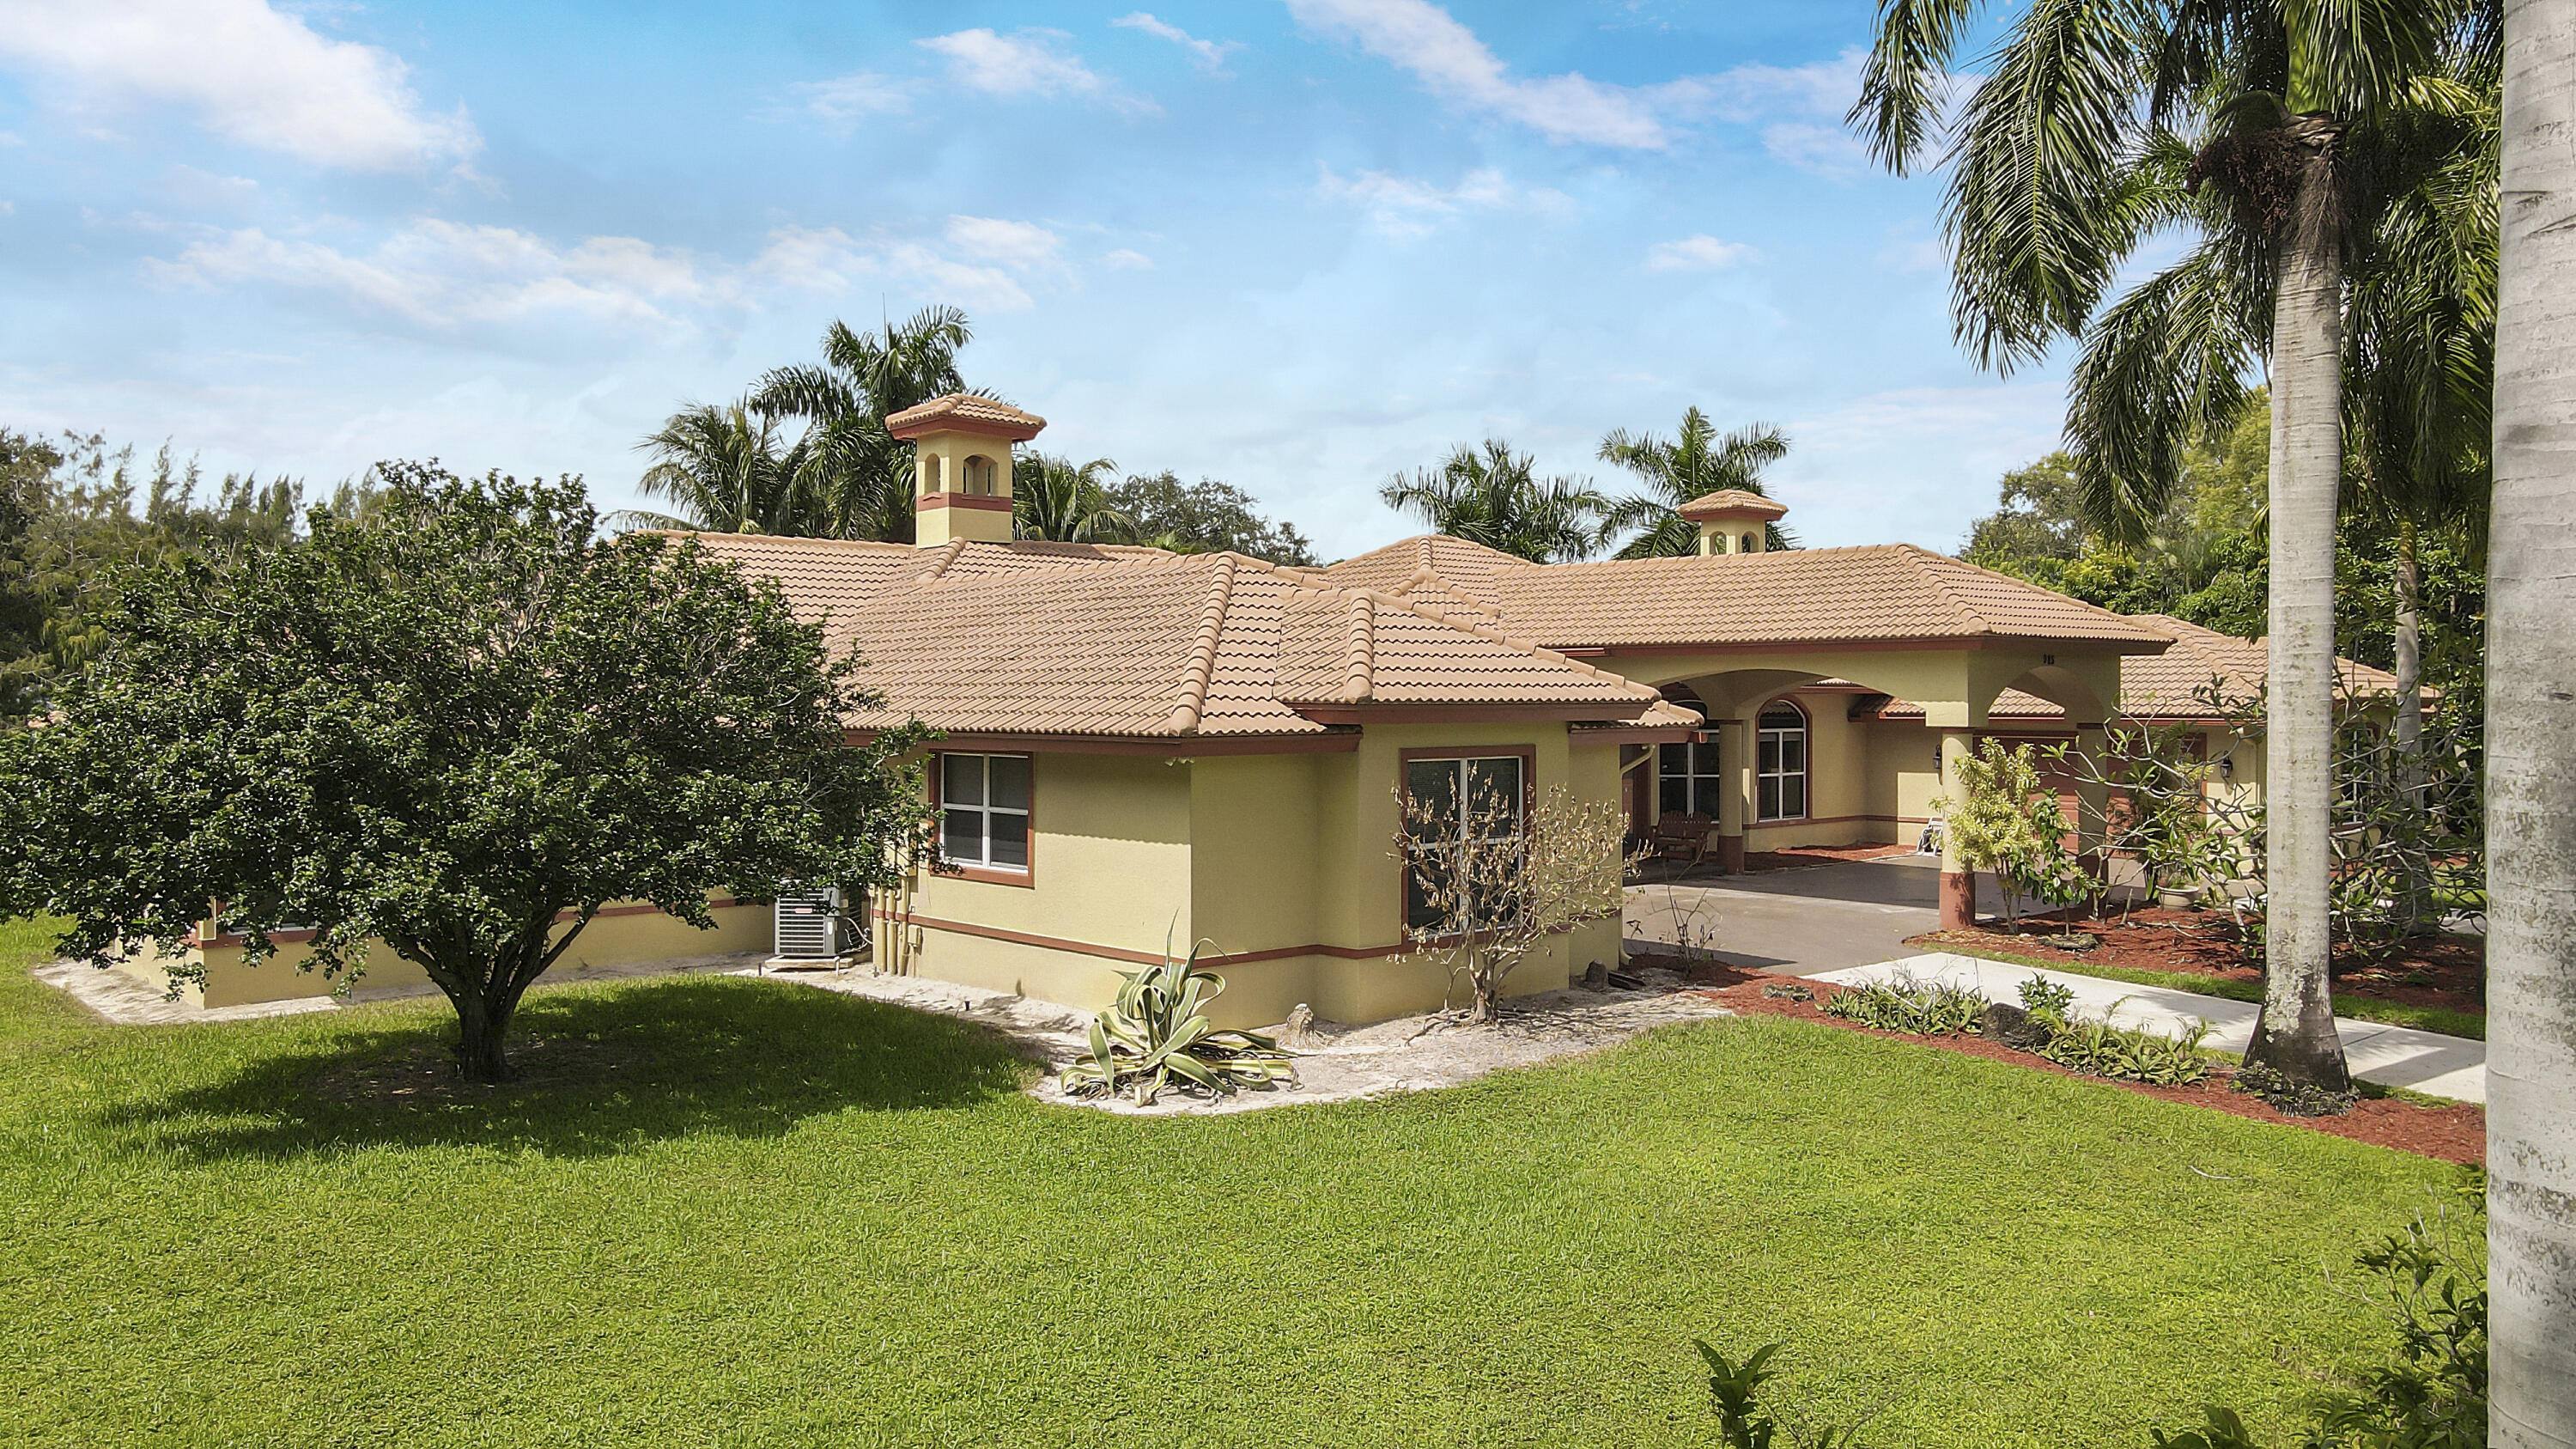 Property for Sale at 985 Whippoorwill Isle, West Palm Beach, Palm Beach County, Florida - Bedrooms: 6 
Bathrooms: 4  - $975,000